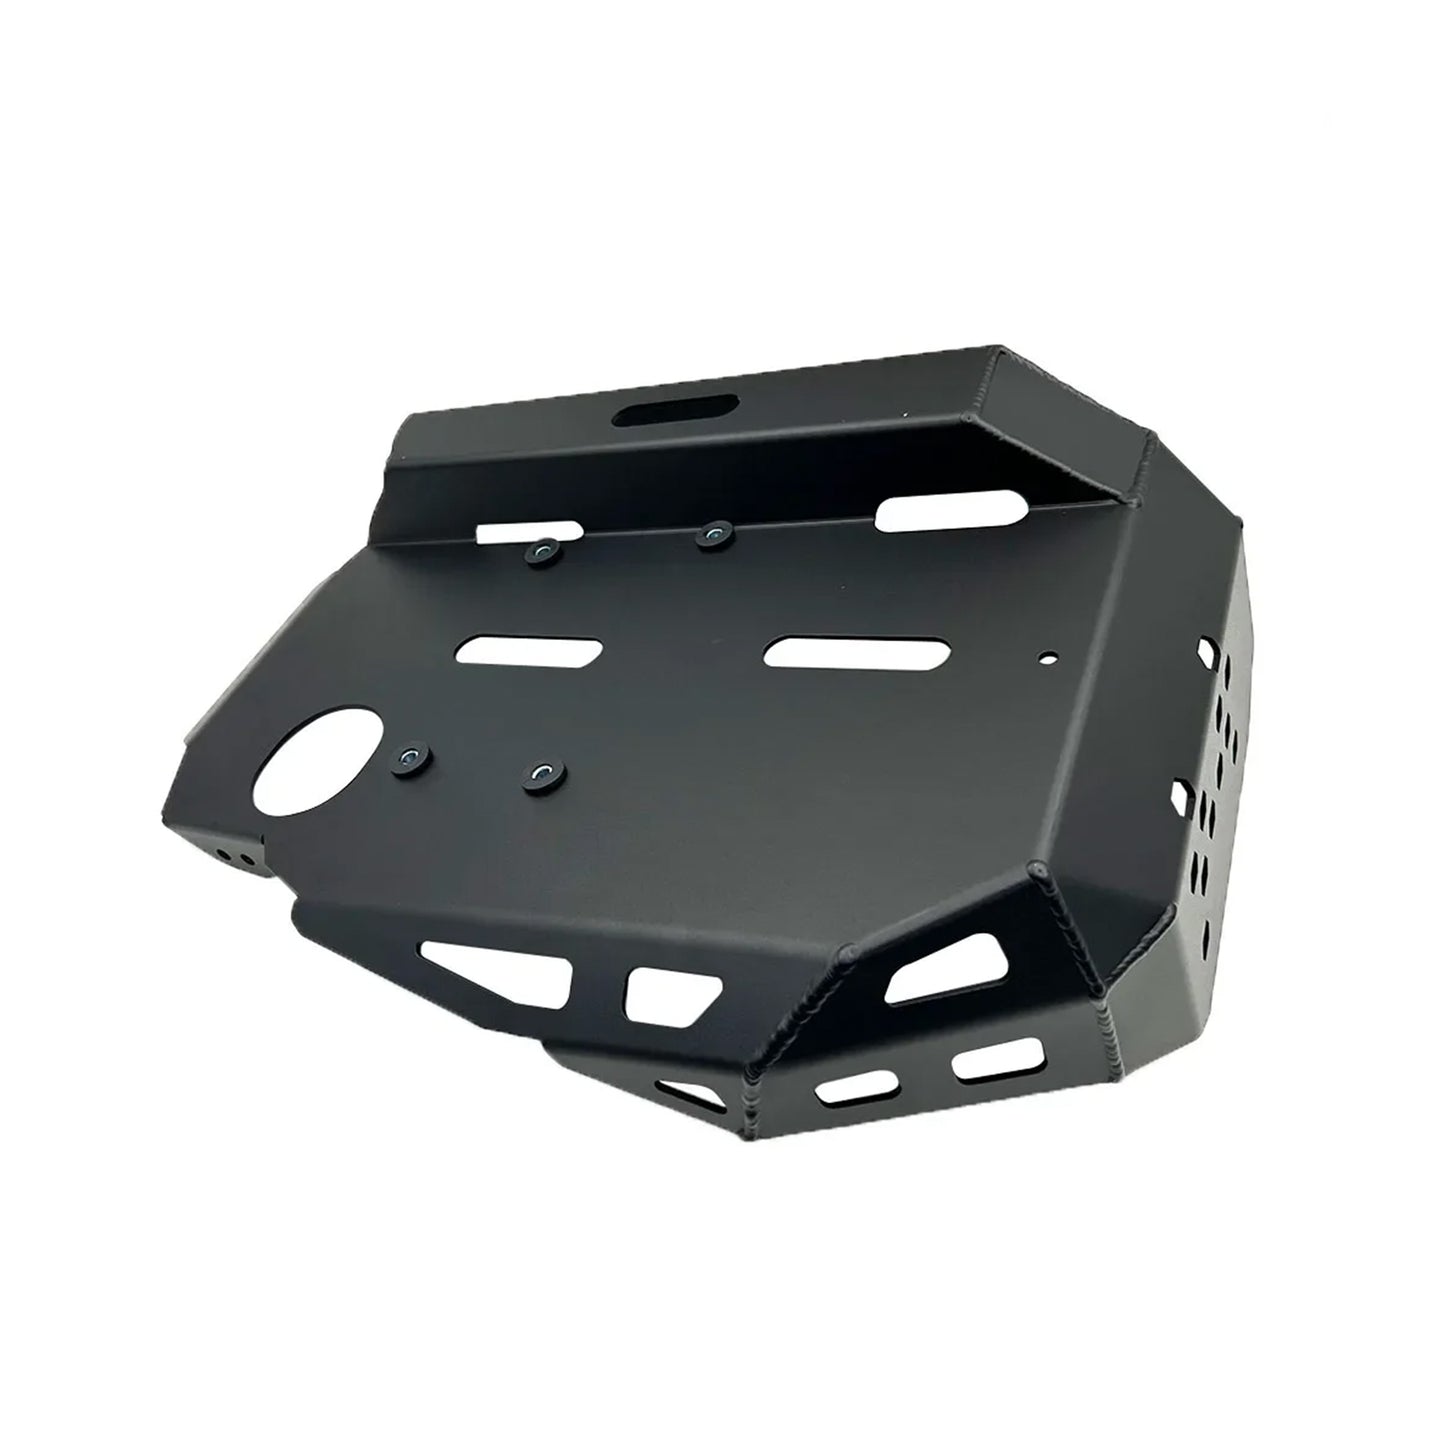 TRK702/X engine protection(Compatible with A/B/C bumper)